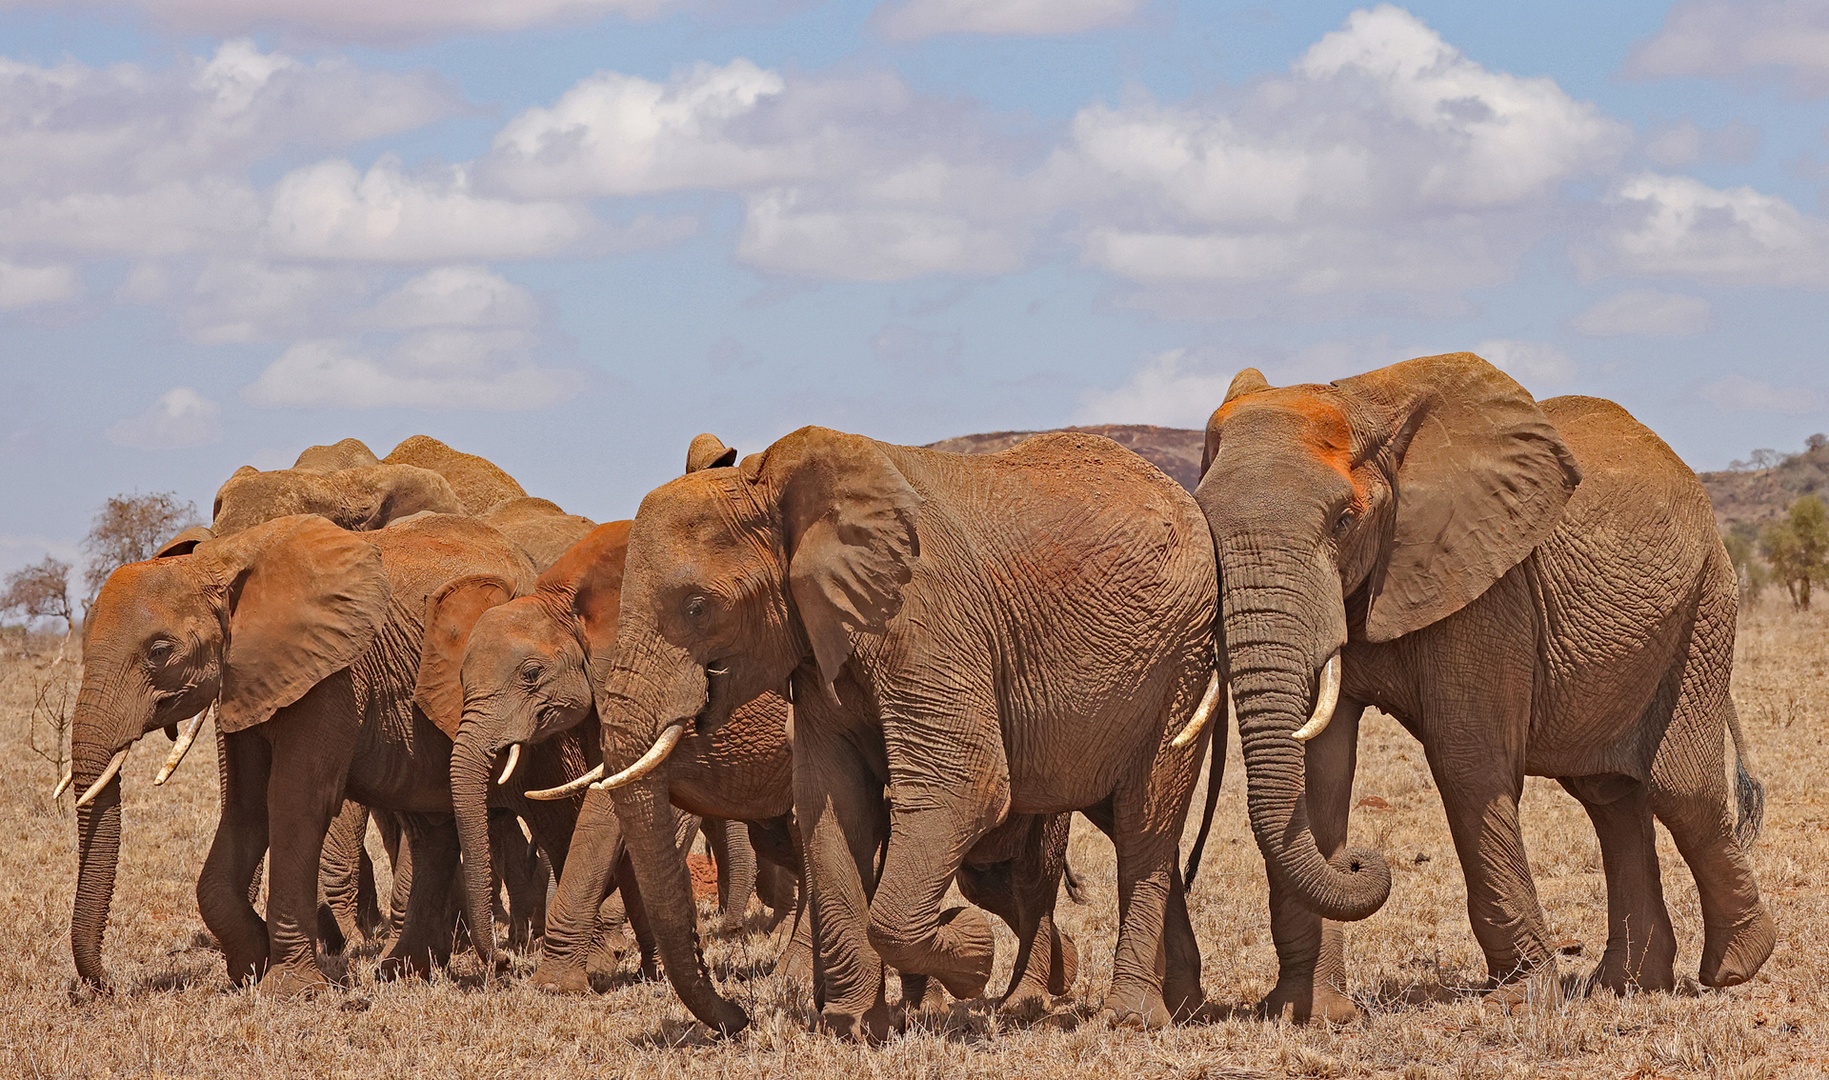 Densely packed group of elephants